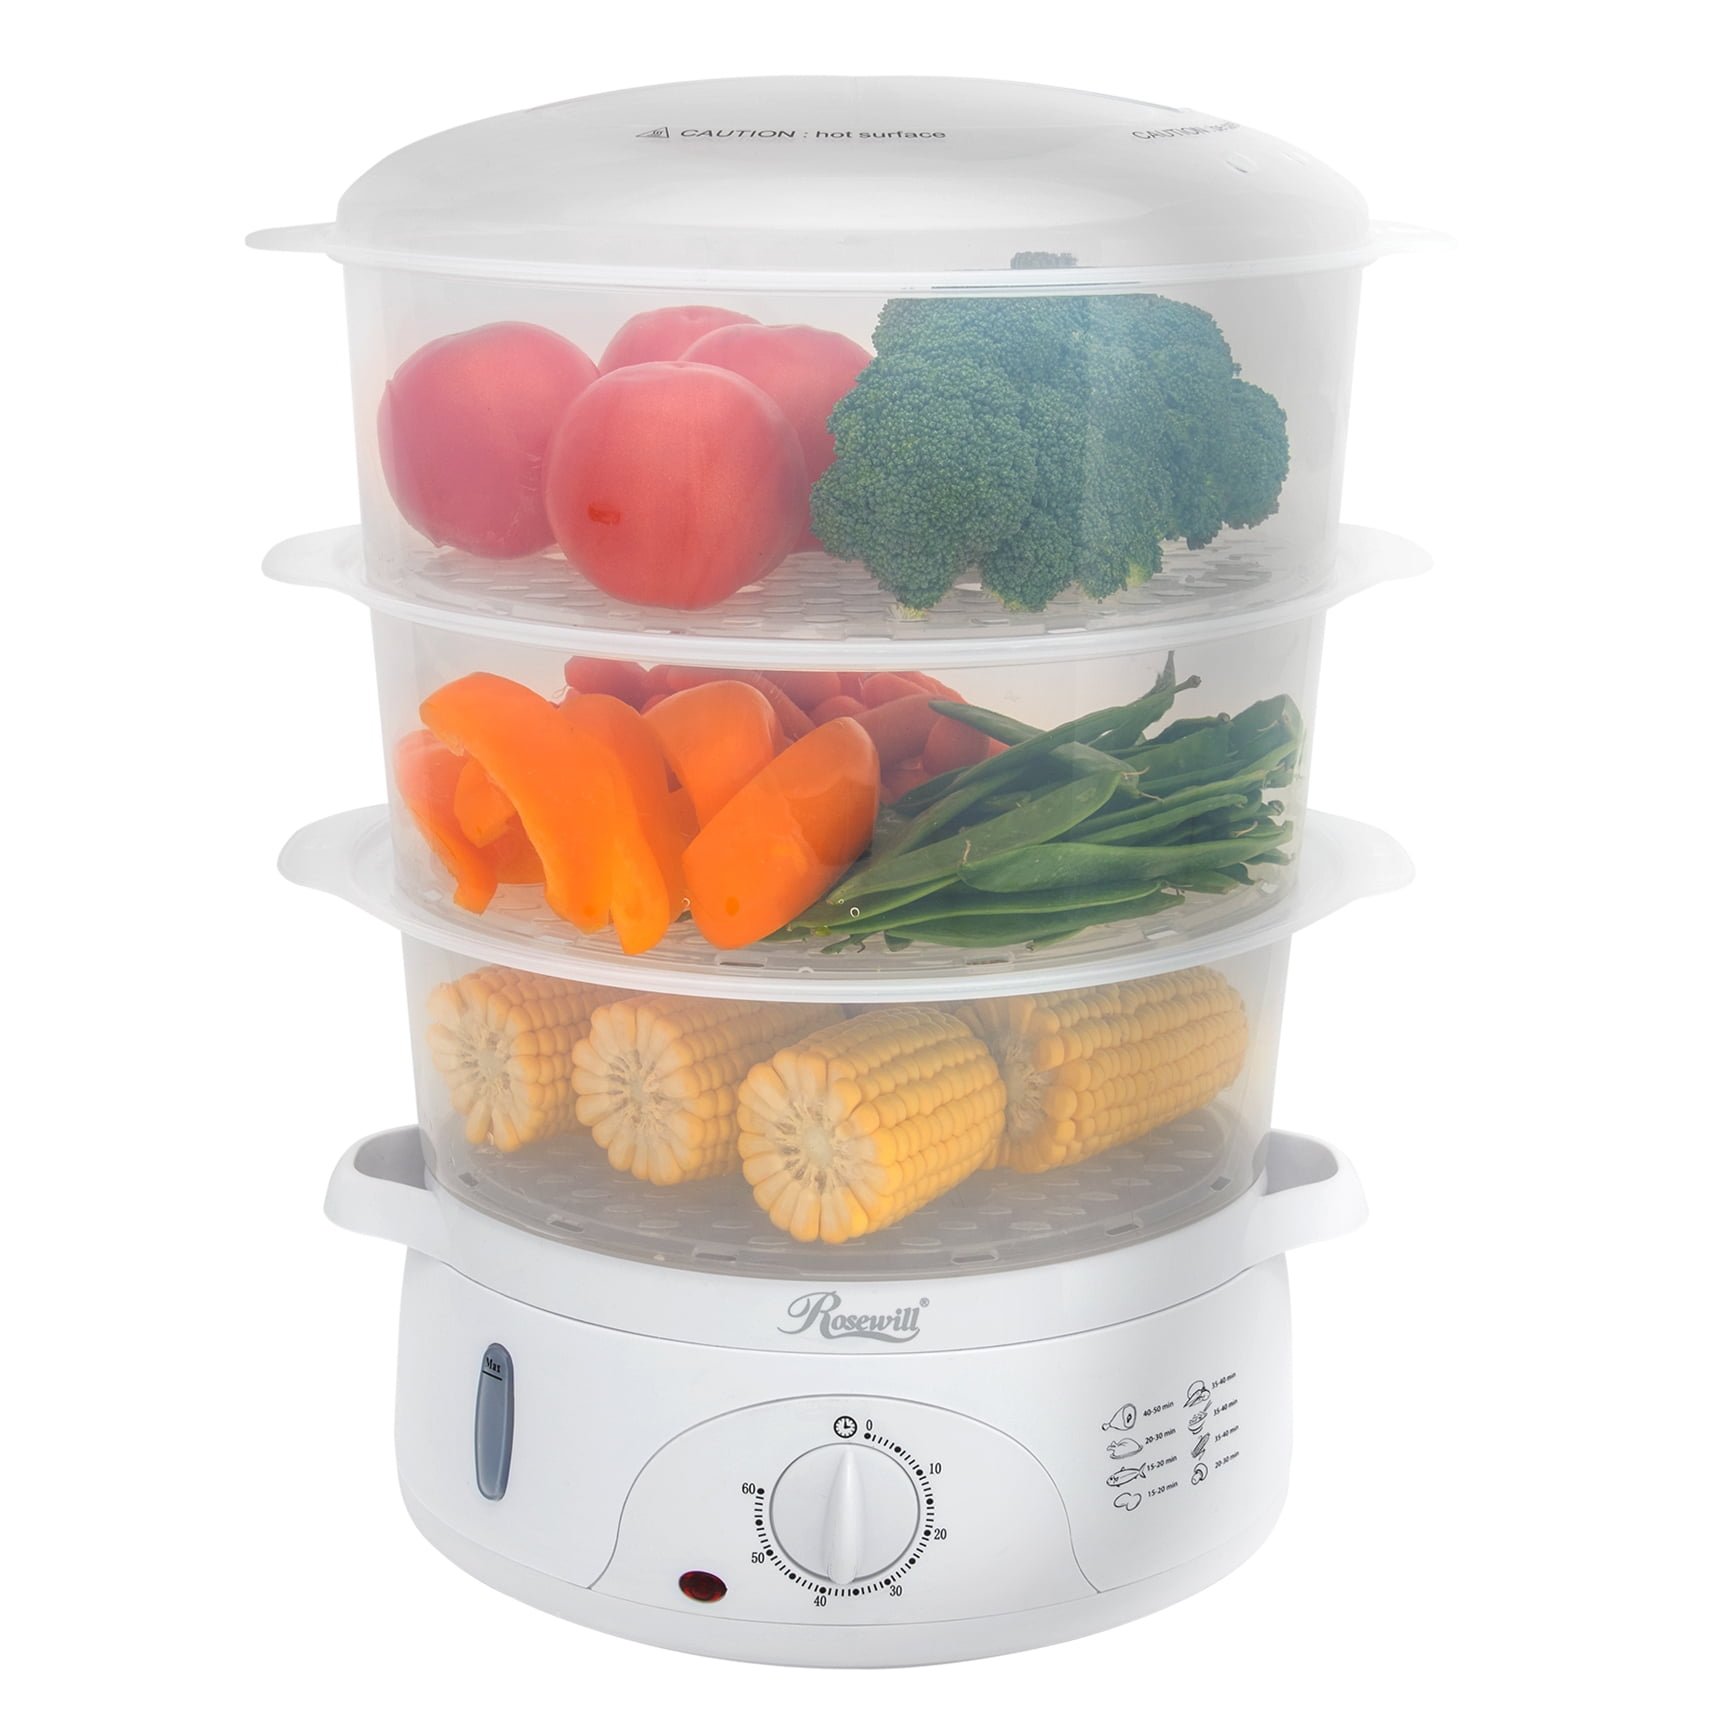 Rosewill Electric Food Steamer 9.5 Quart, Vegetable